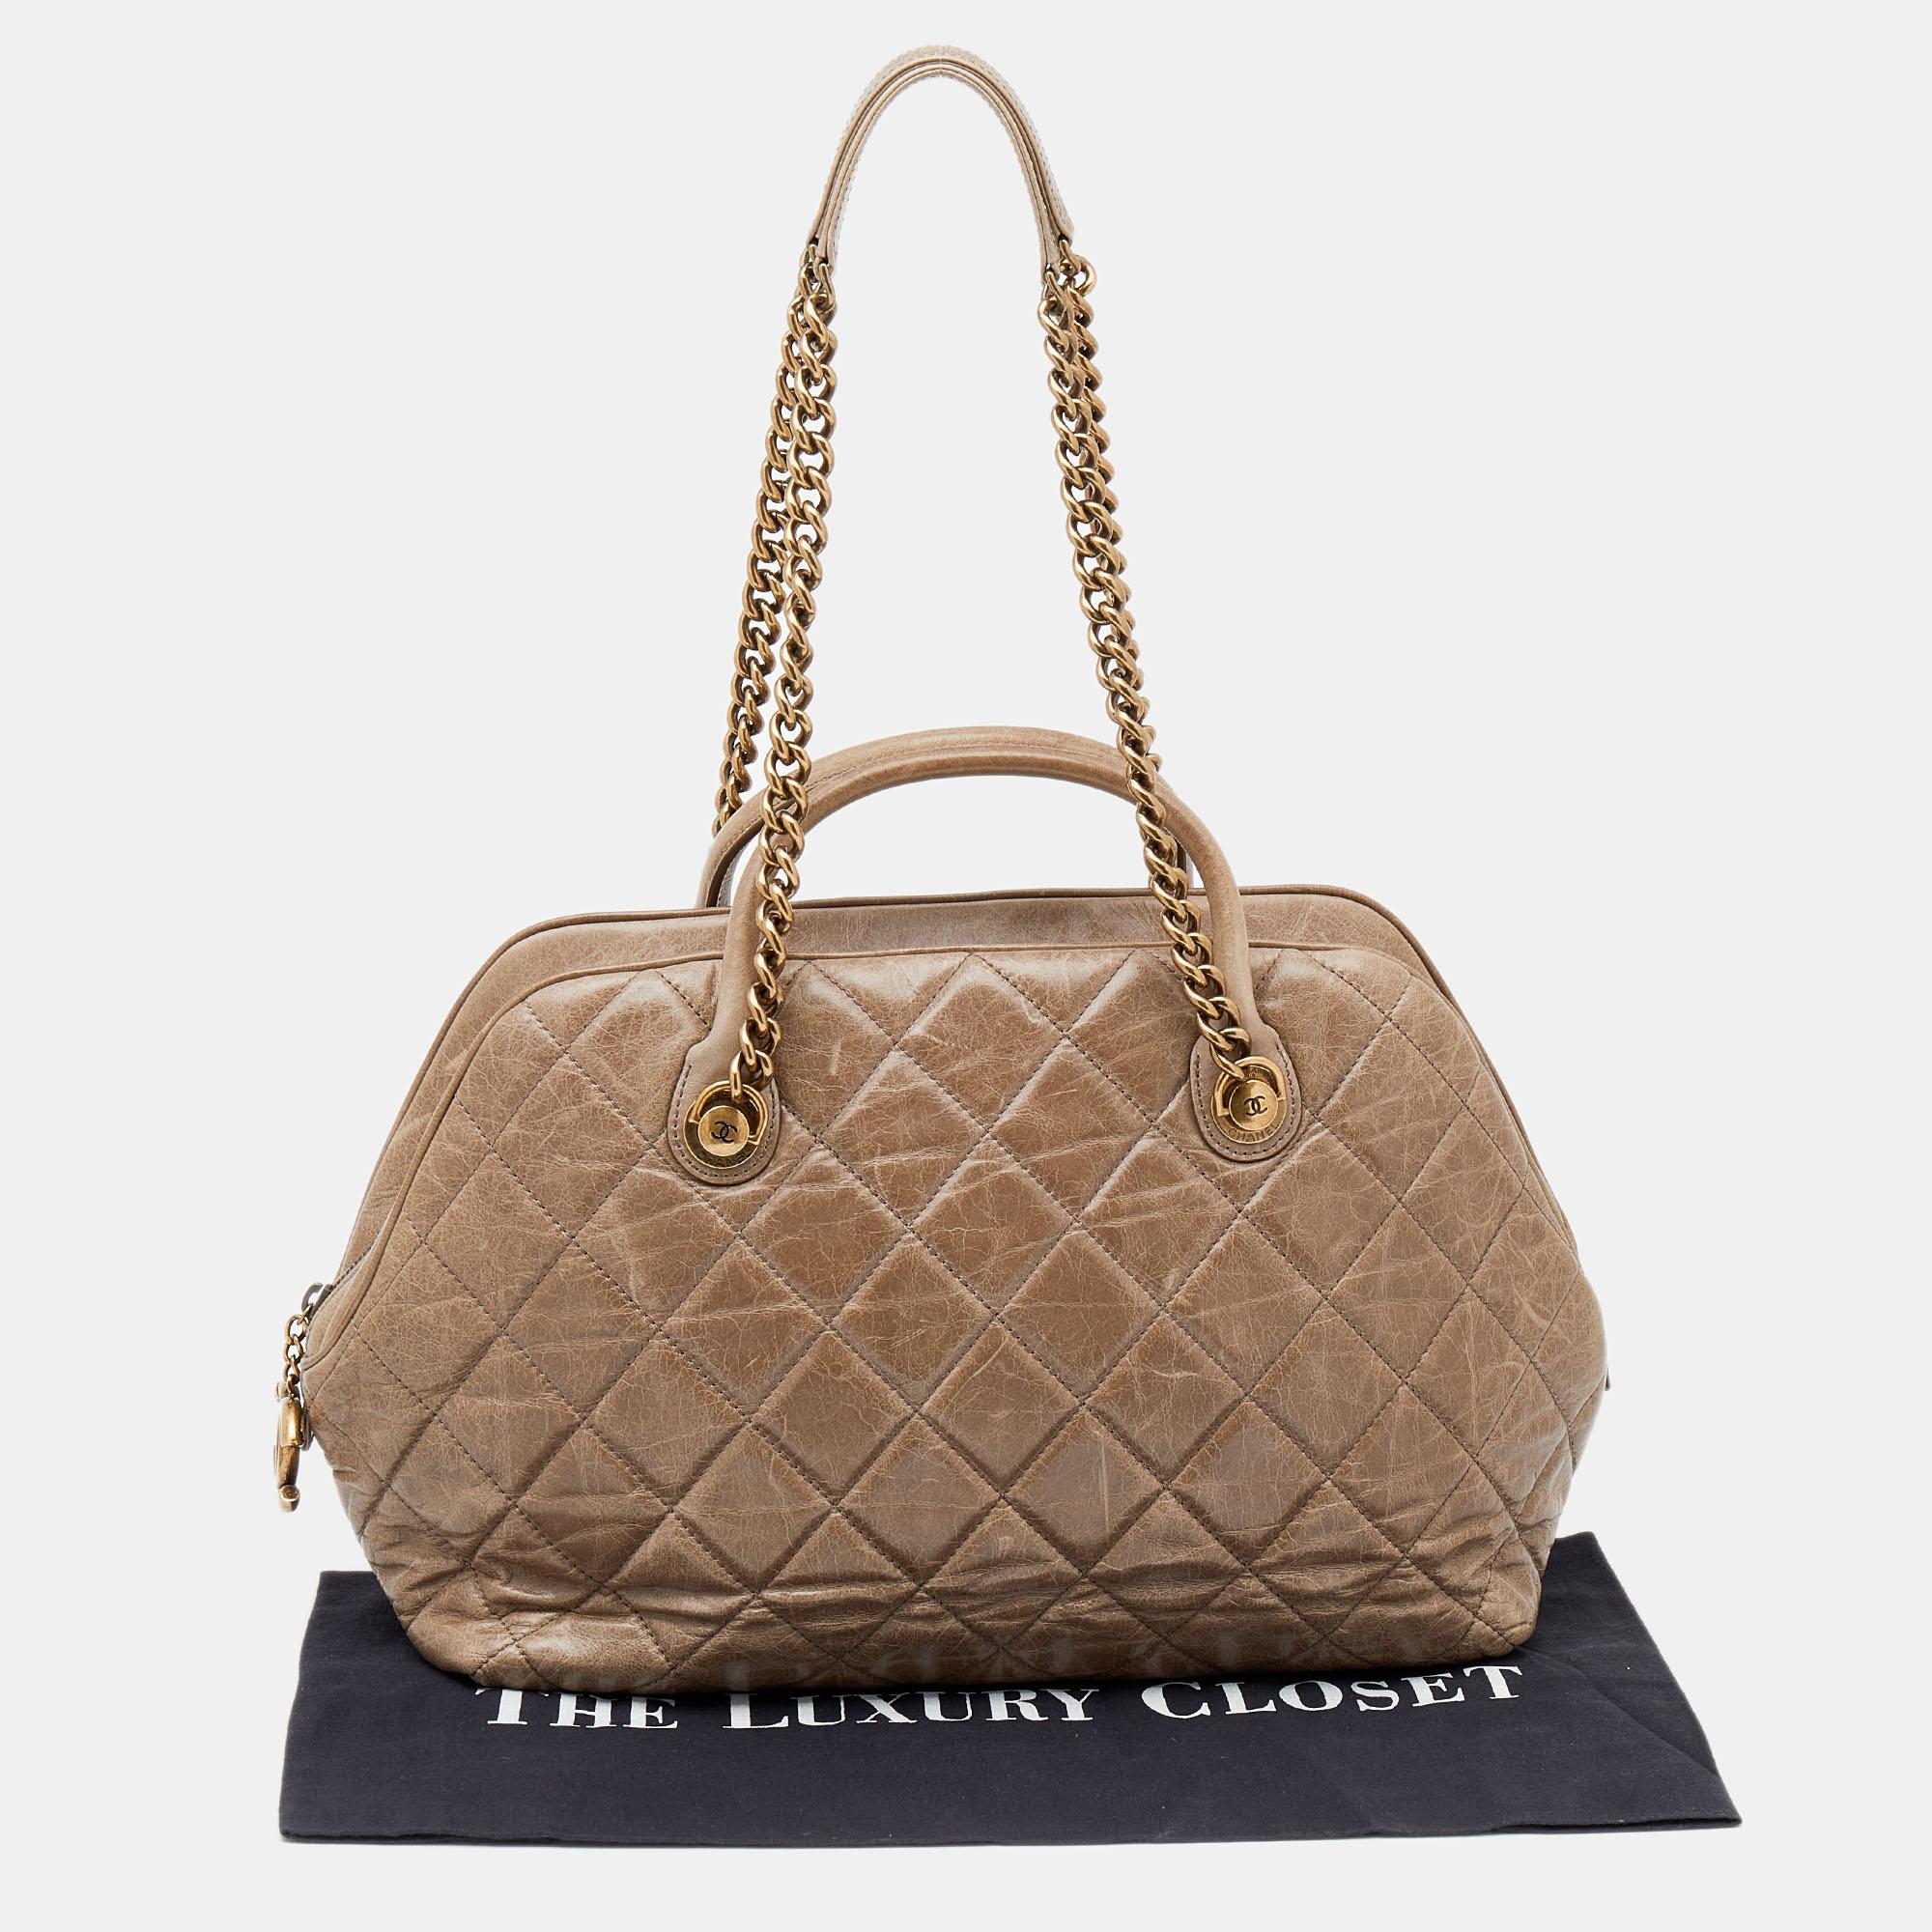 Chanel Dark Beige Quilted Leather Castle Rock Bowling Bag 4